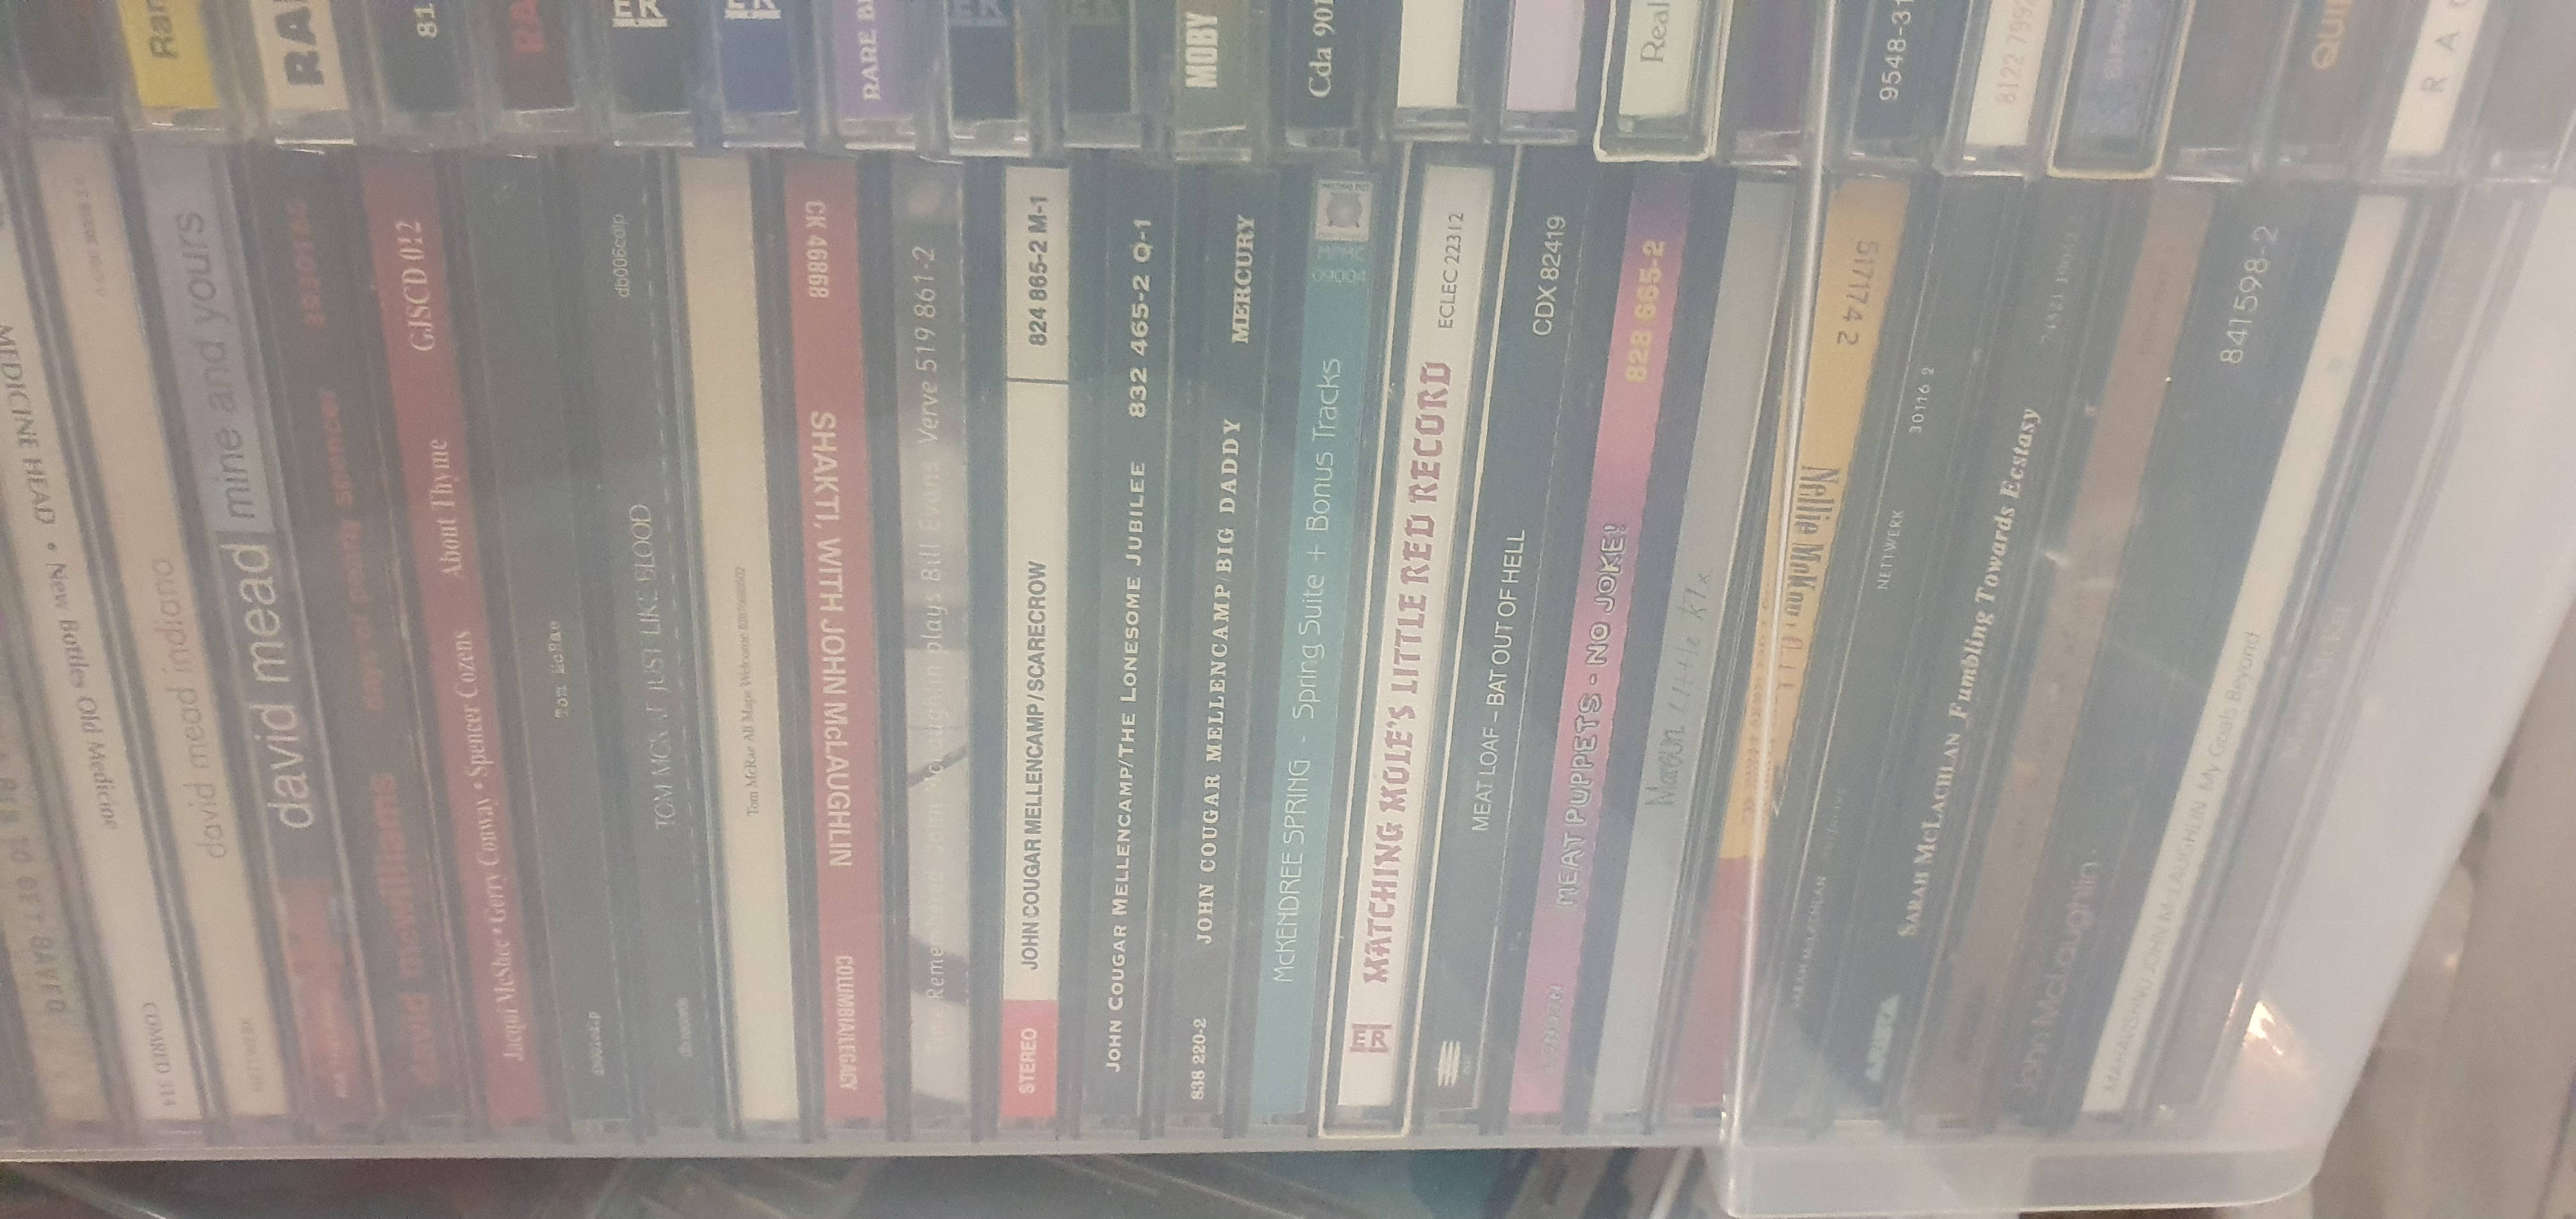 LARGE COLLECTION OF APPROX 200 MUSIC CD'S - Image 9 of 10